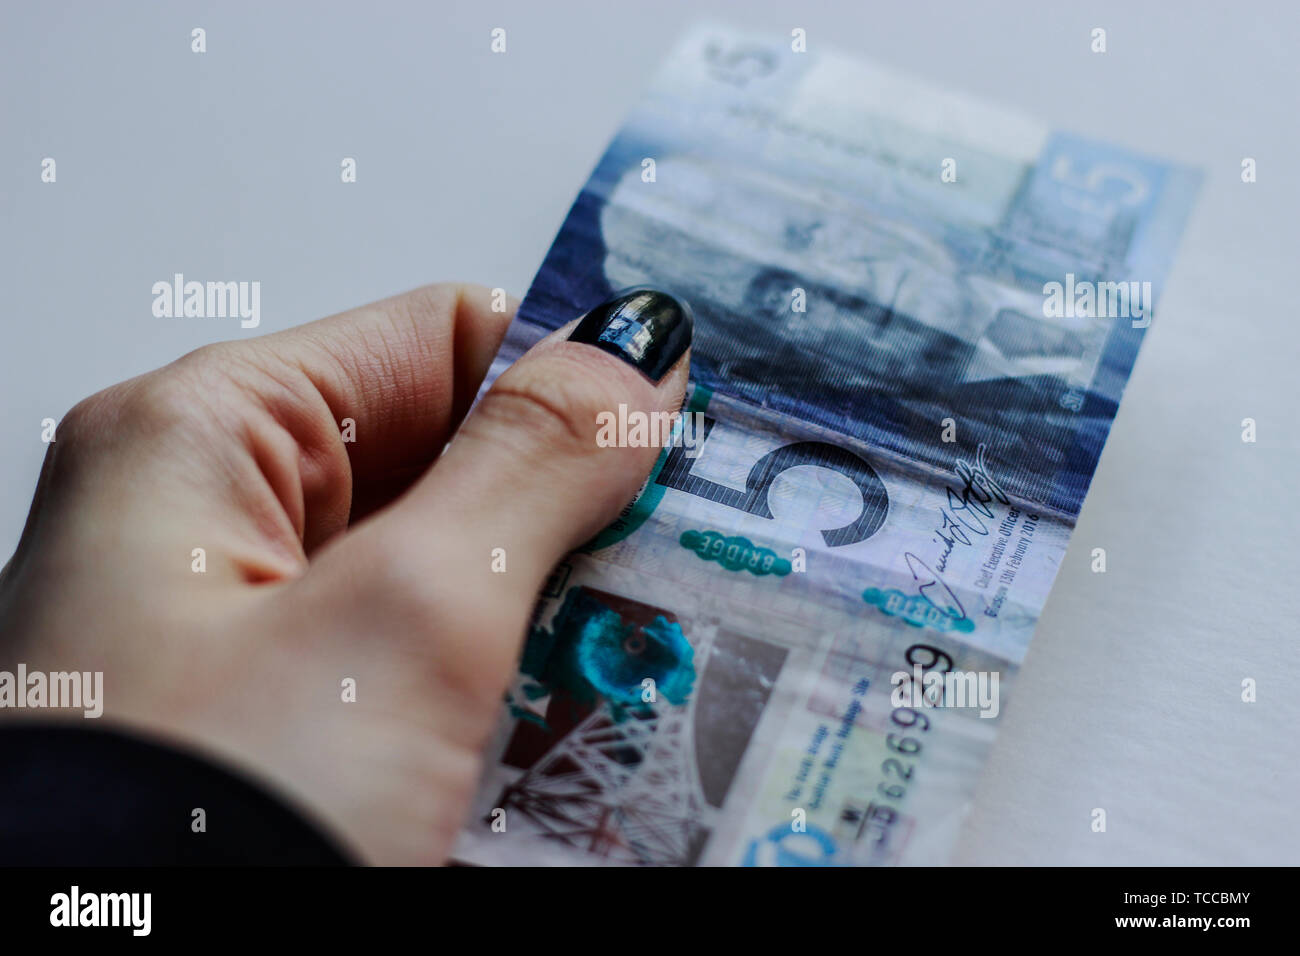 Bank of Scotland £5 note, a fiver, banknote of the pound sterling, May 2019, UK.Woman holding 5 pounds paper Scottish bank note over isolated backgrou Stock Photo